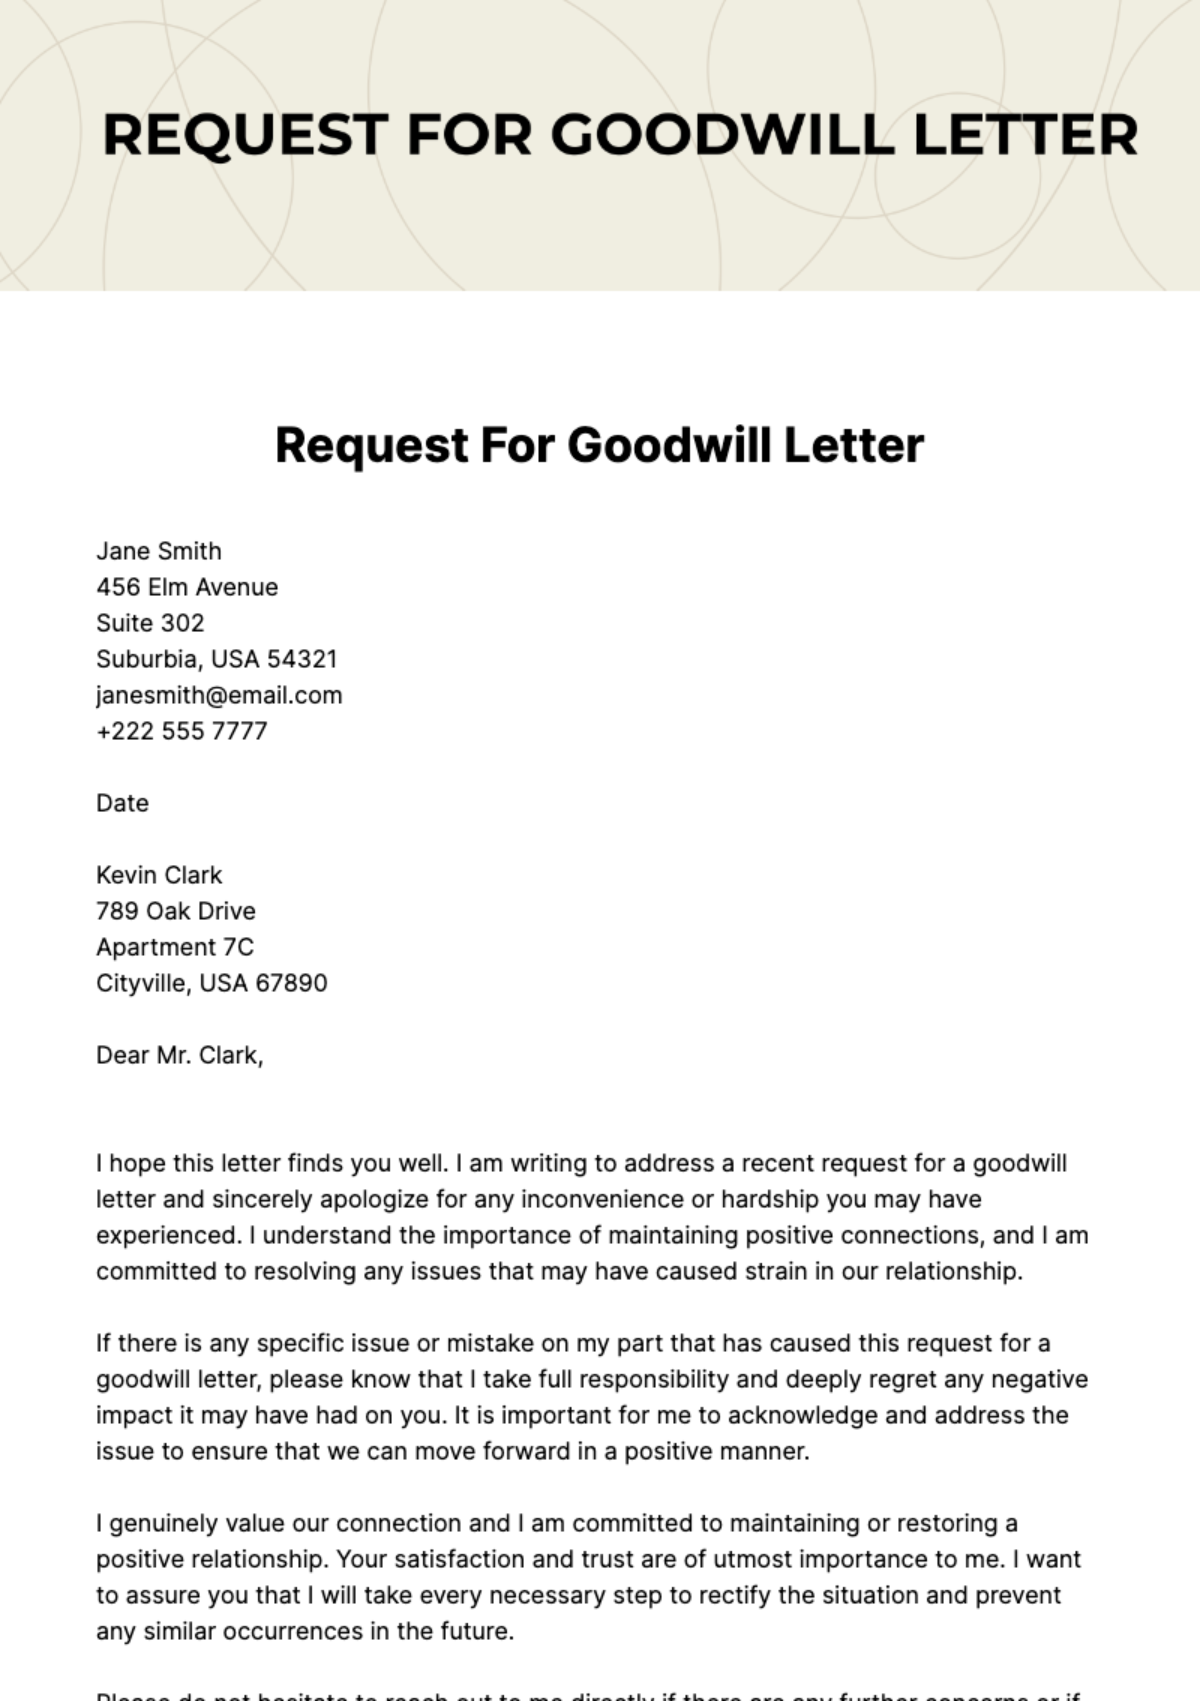 Free Request For Goodwill Letter Template